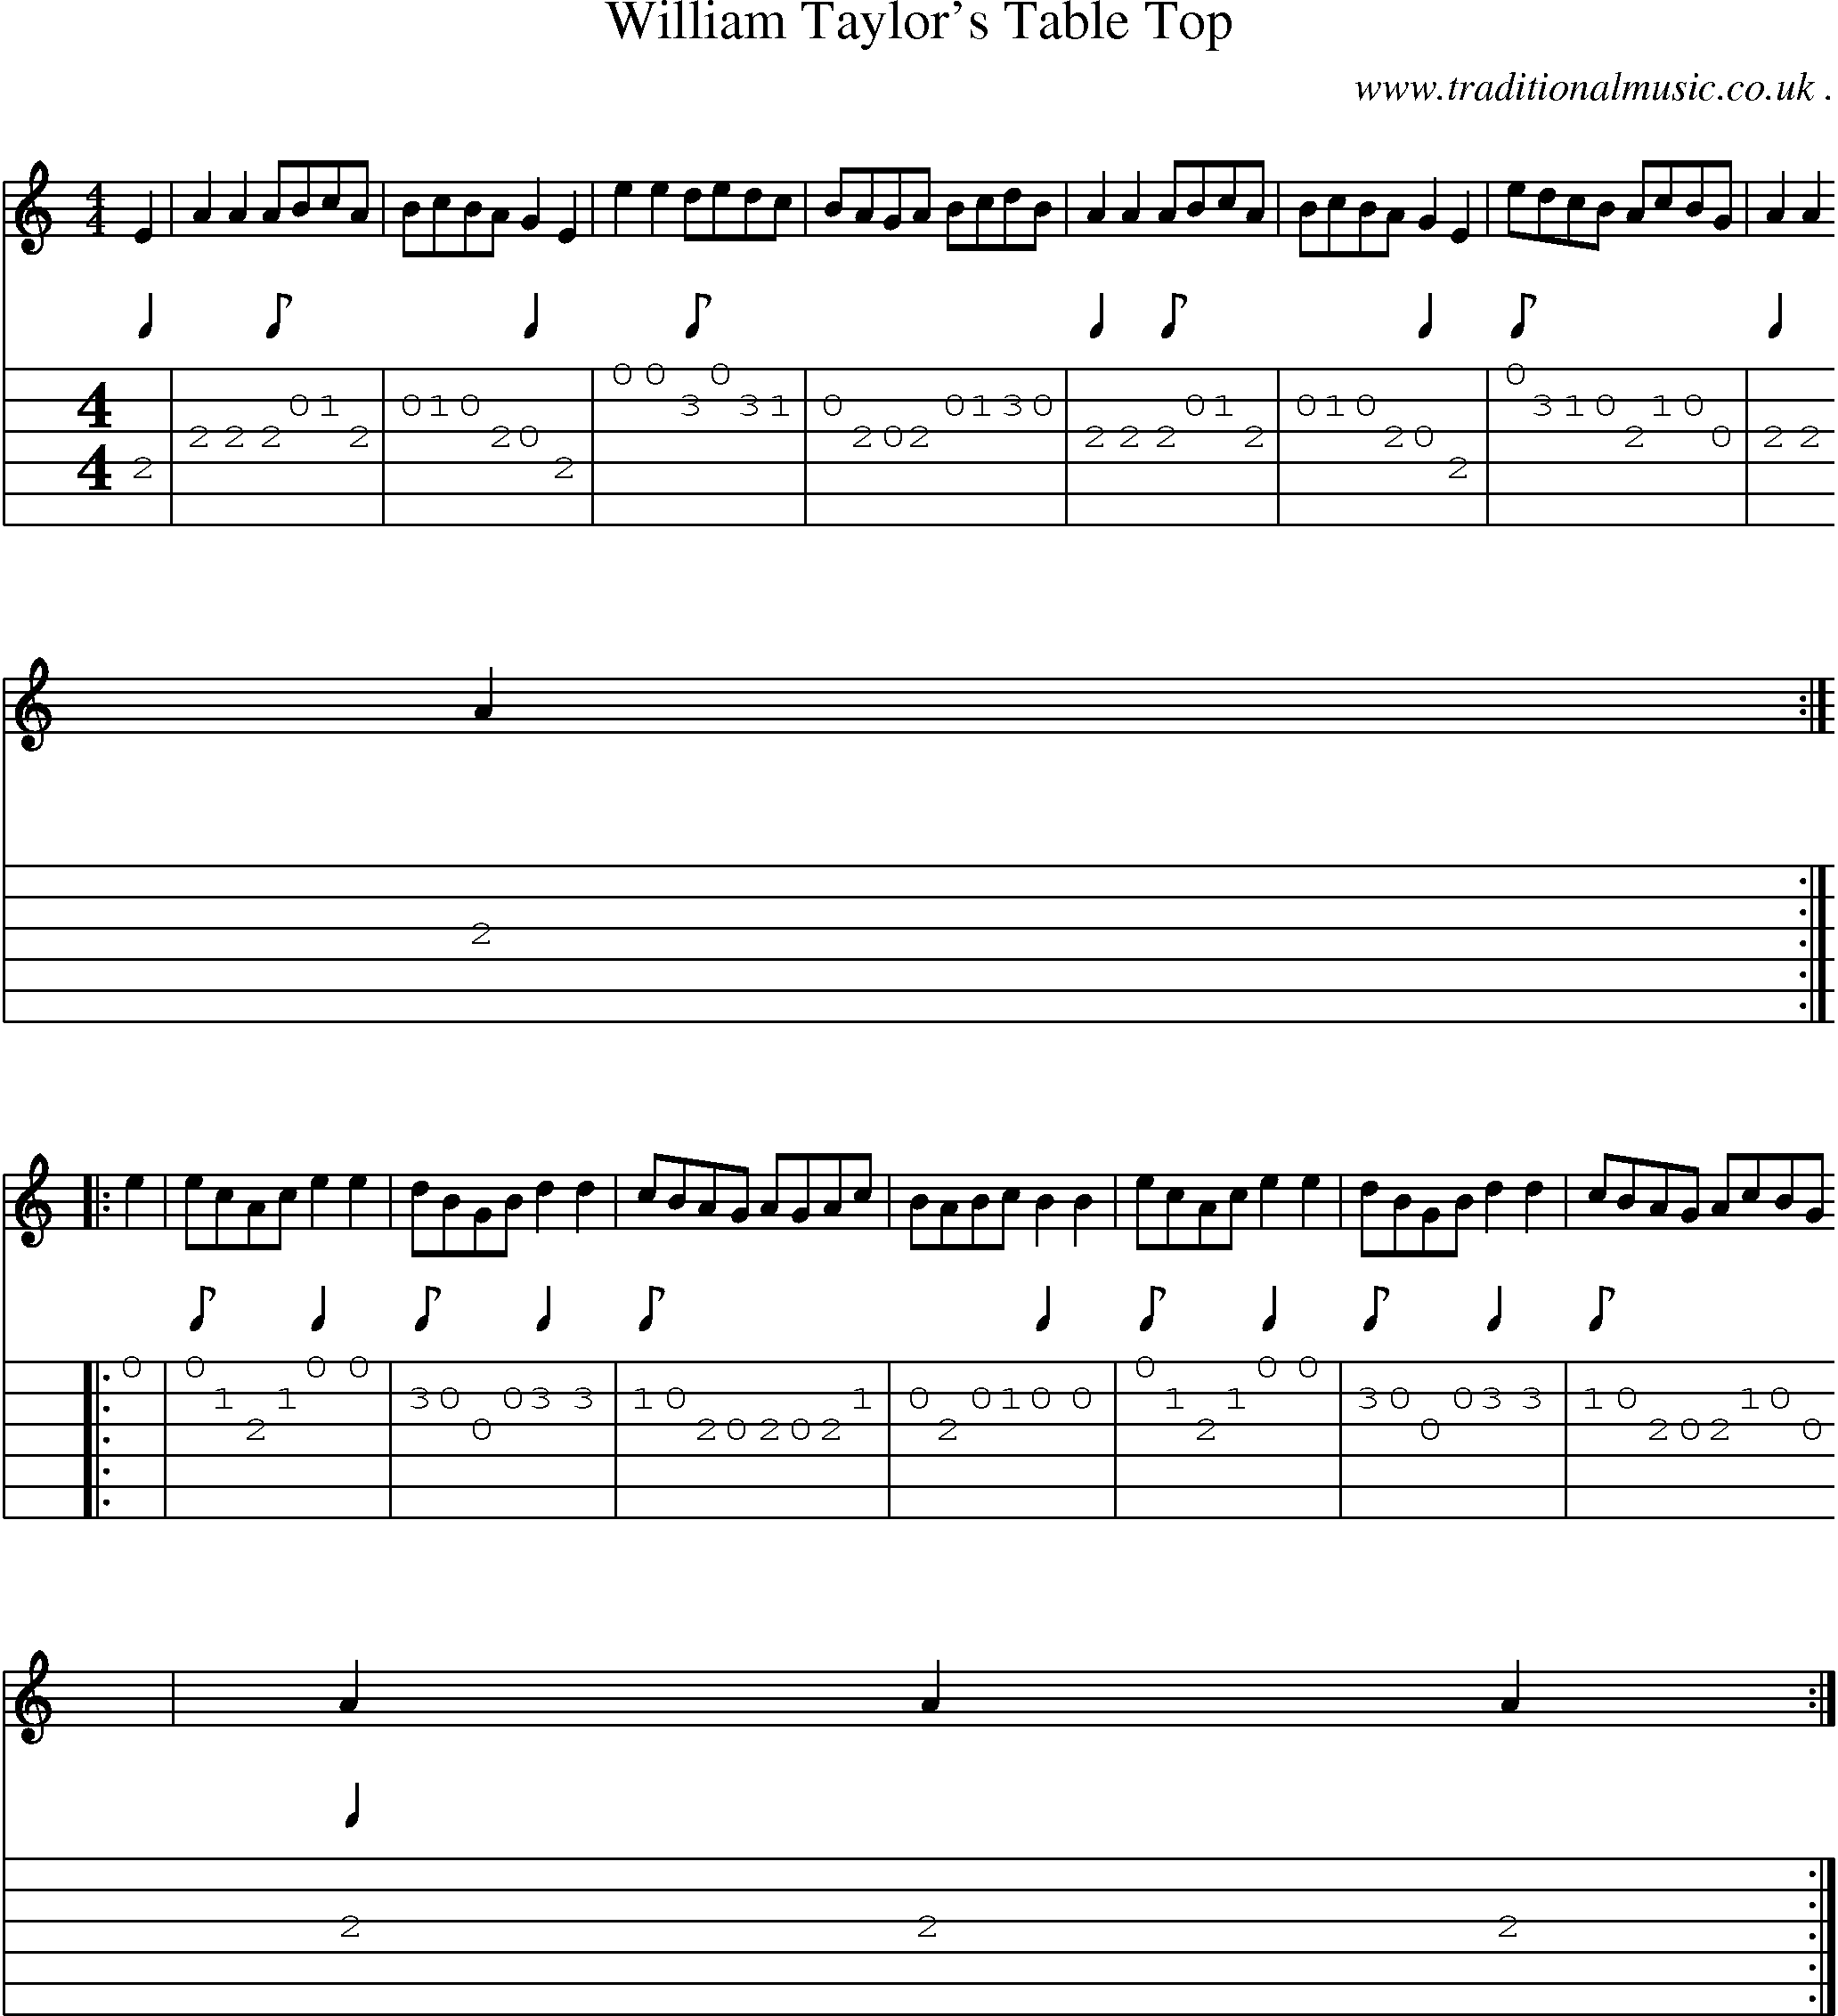 Sheet-Music and Guitar Tabs for William Taylors Table Top